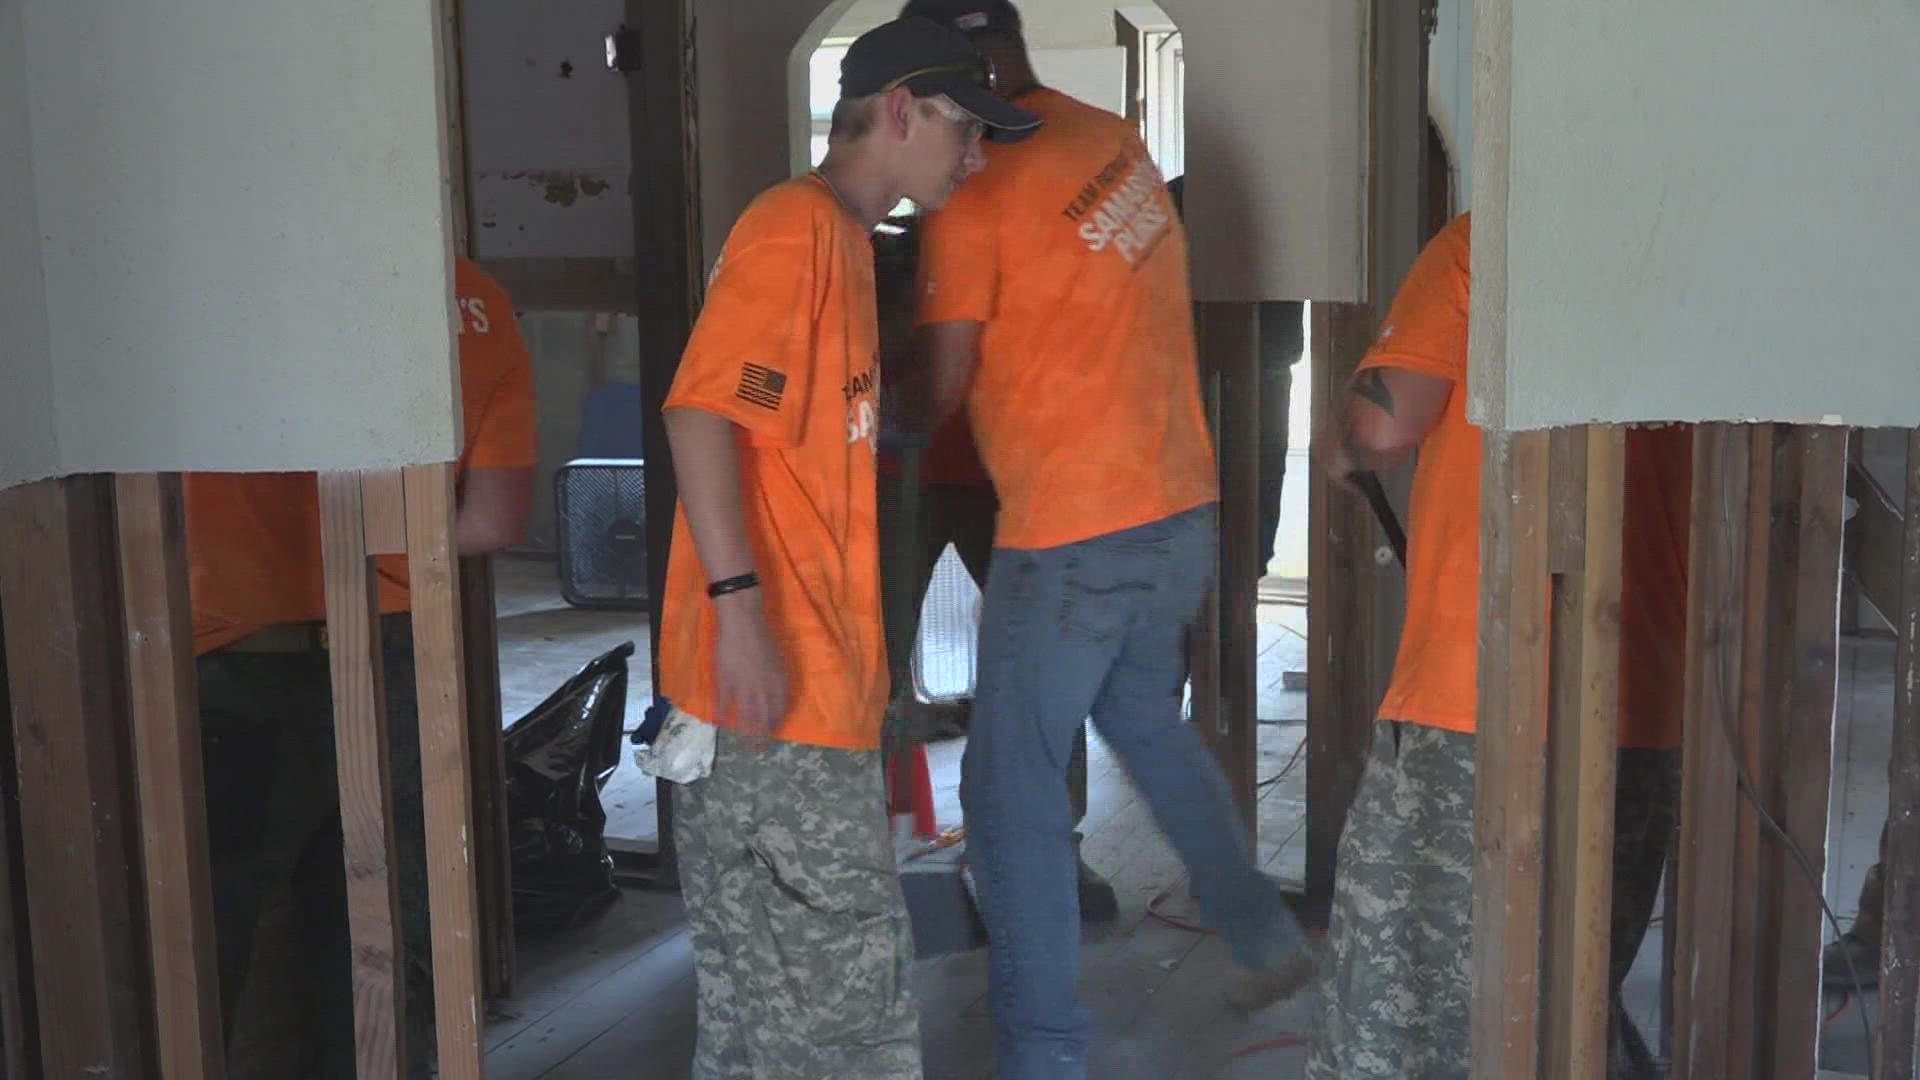 Homeowners affected by the flood or volunteers looking to help can get involved with Samaritan's Purse's disaster relief efforts through Oct. 1.